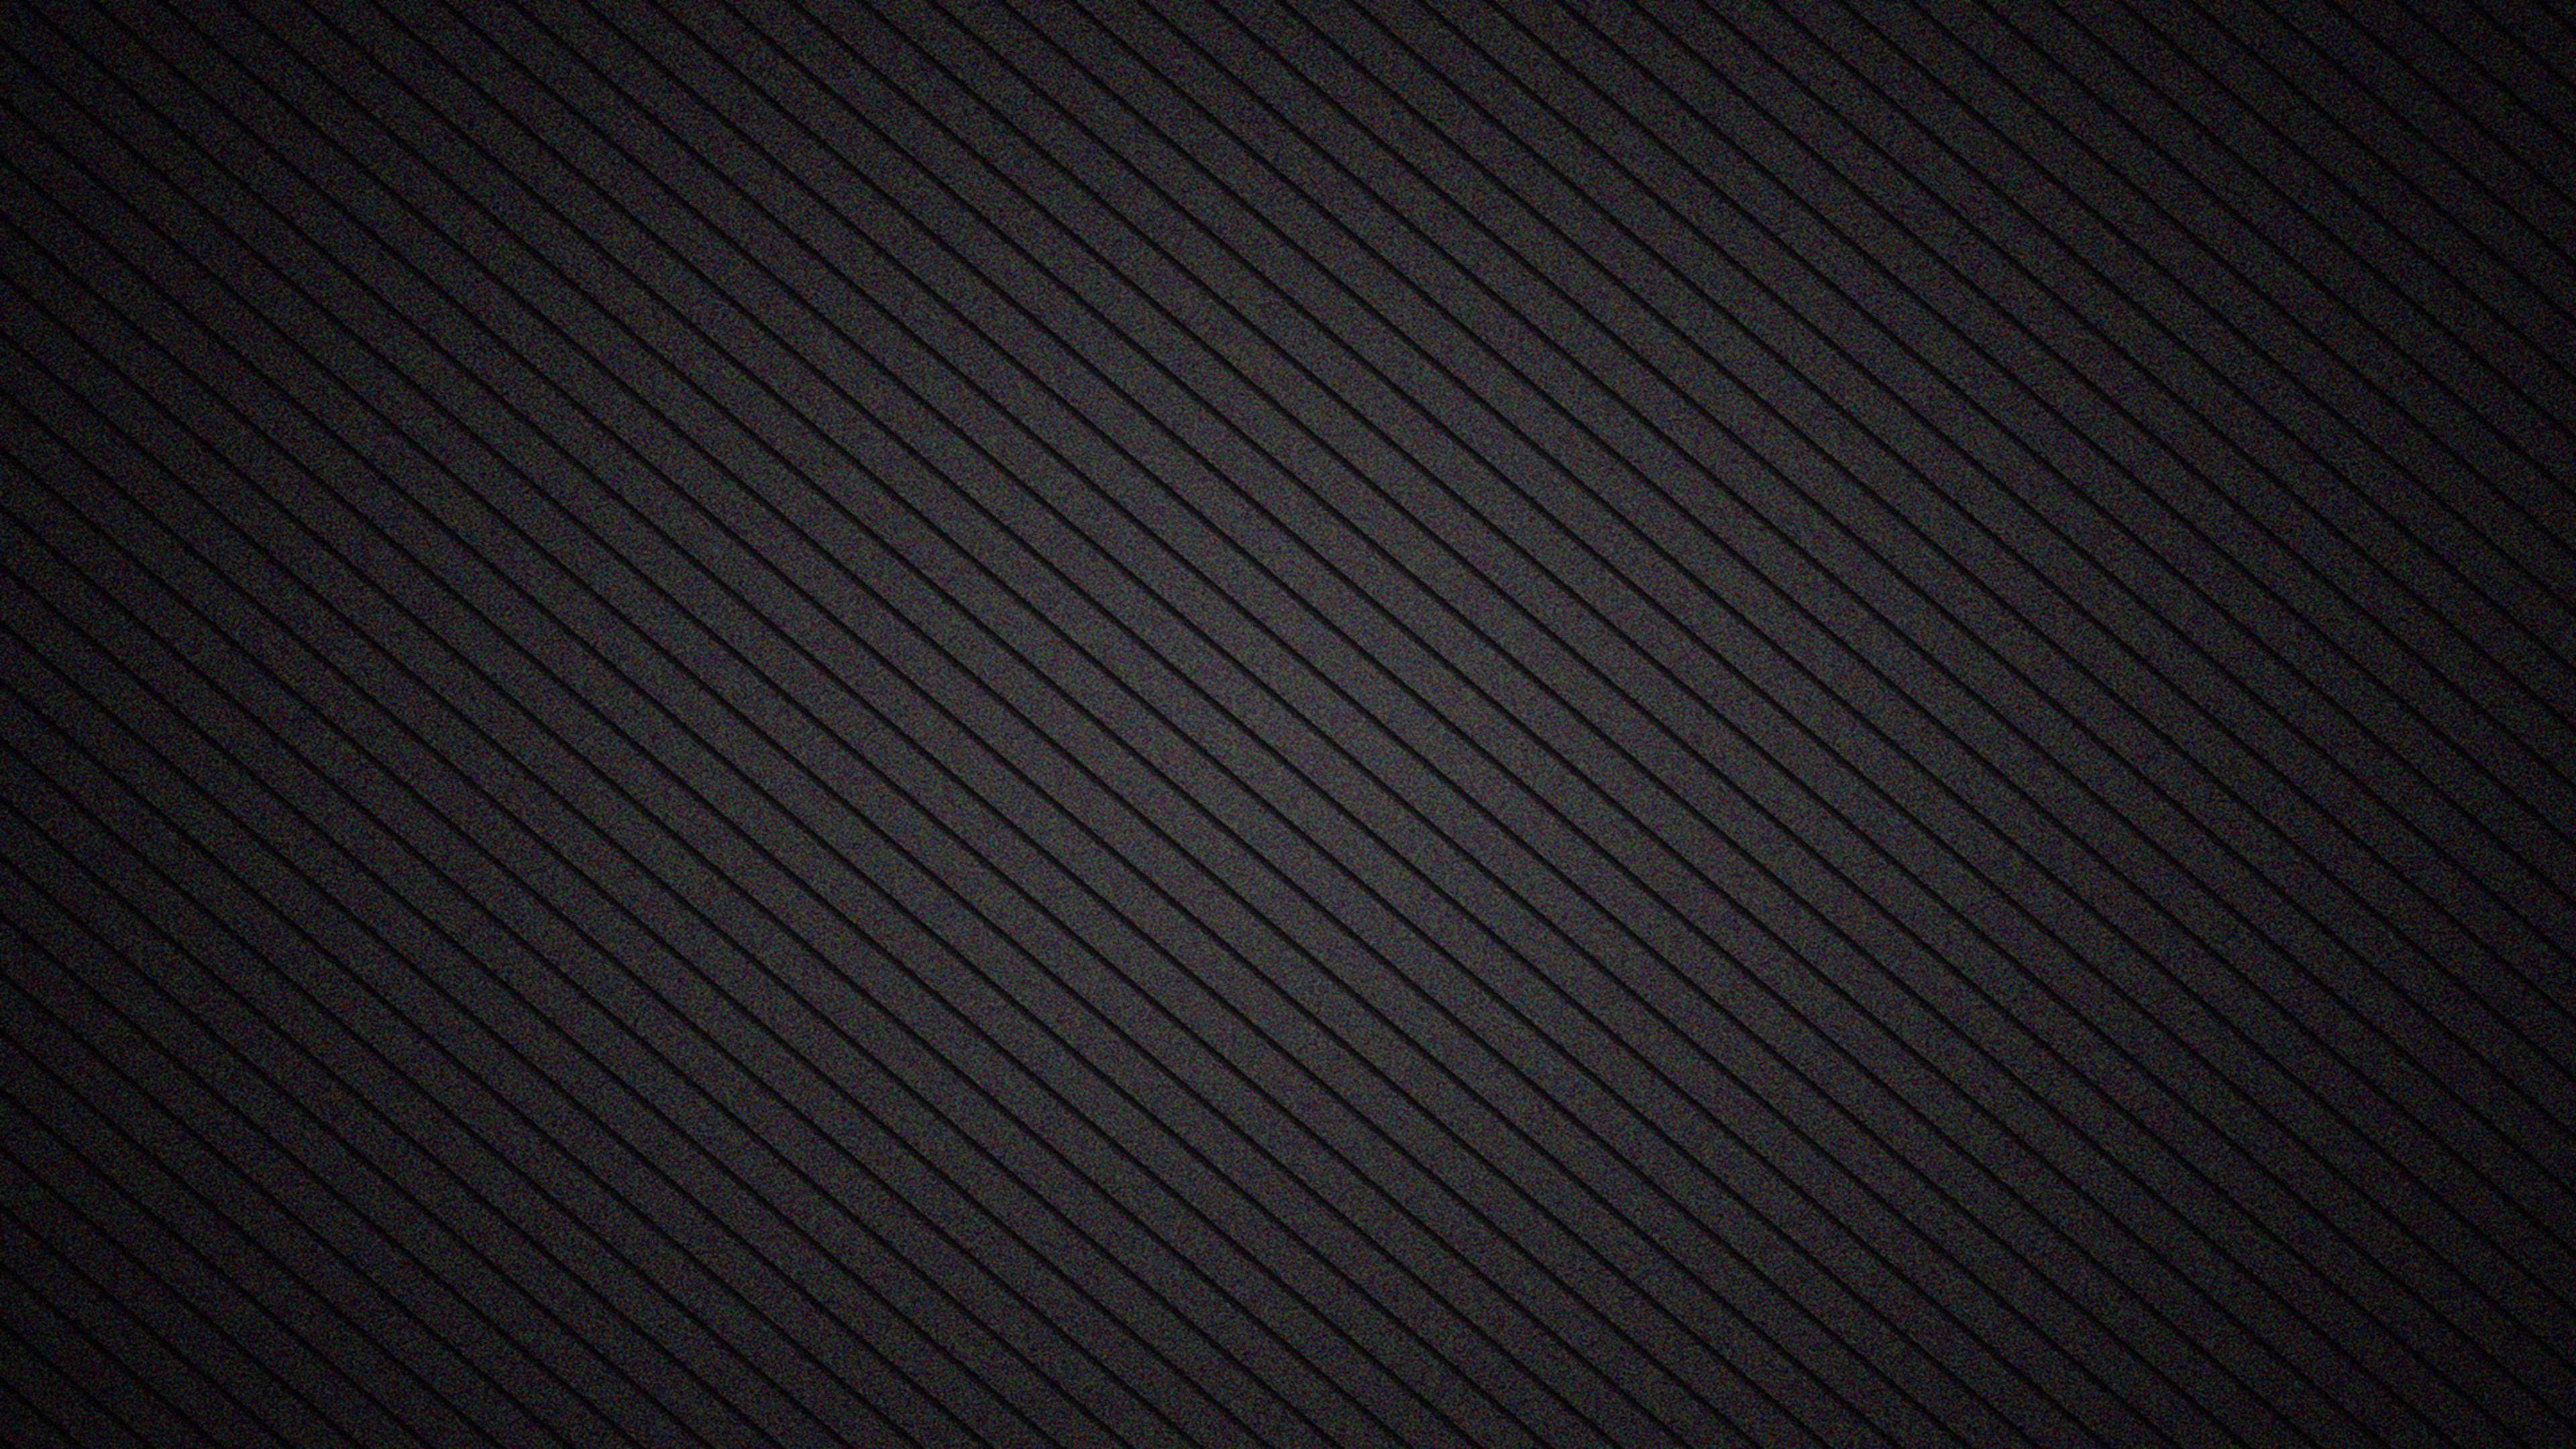 3840 X 2160 Black Wallpapers - Top Free 3840 X 2160 Black Backgrounds